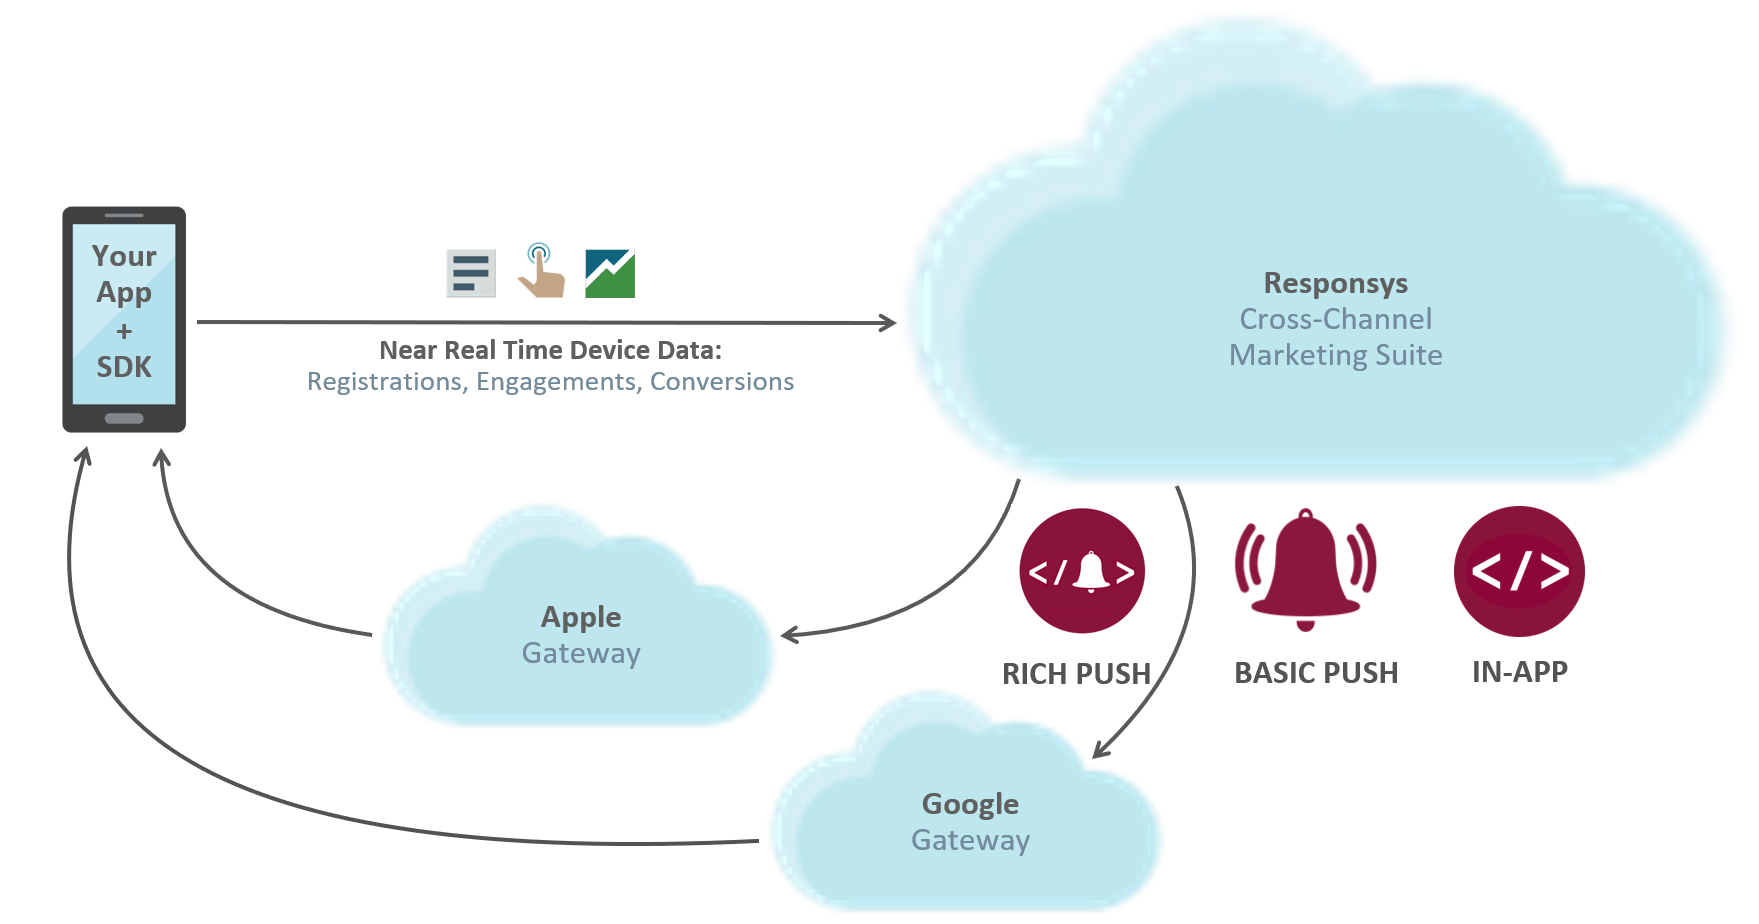 A diagram displaying how the Oracle Responsys Mobile App Platform Cloud Service works